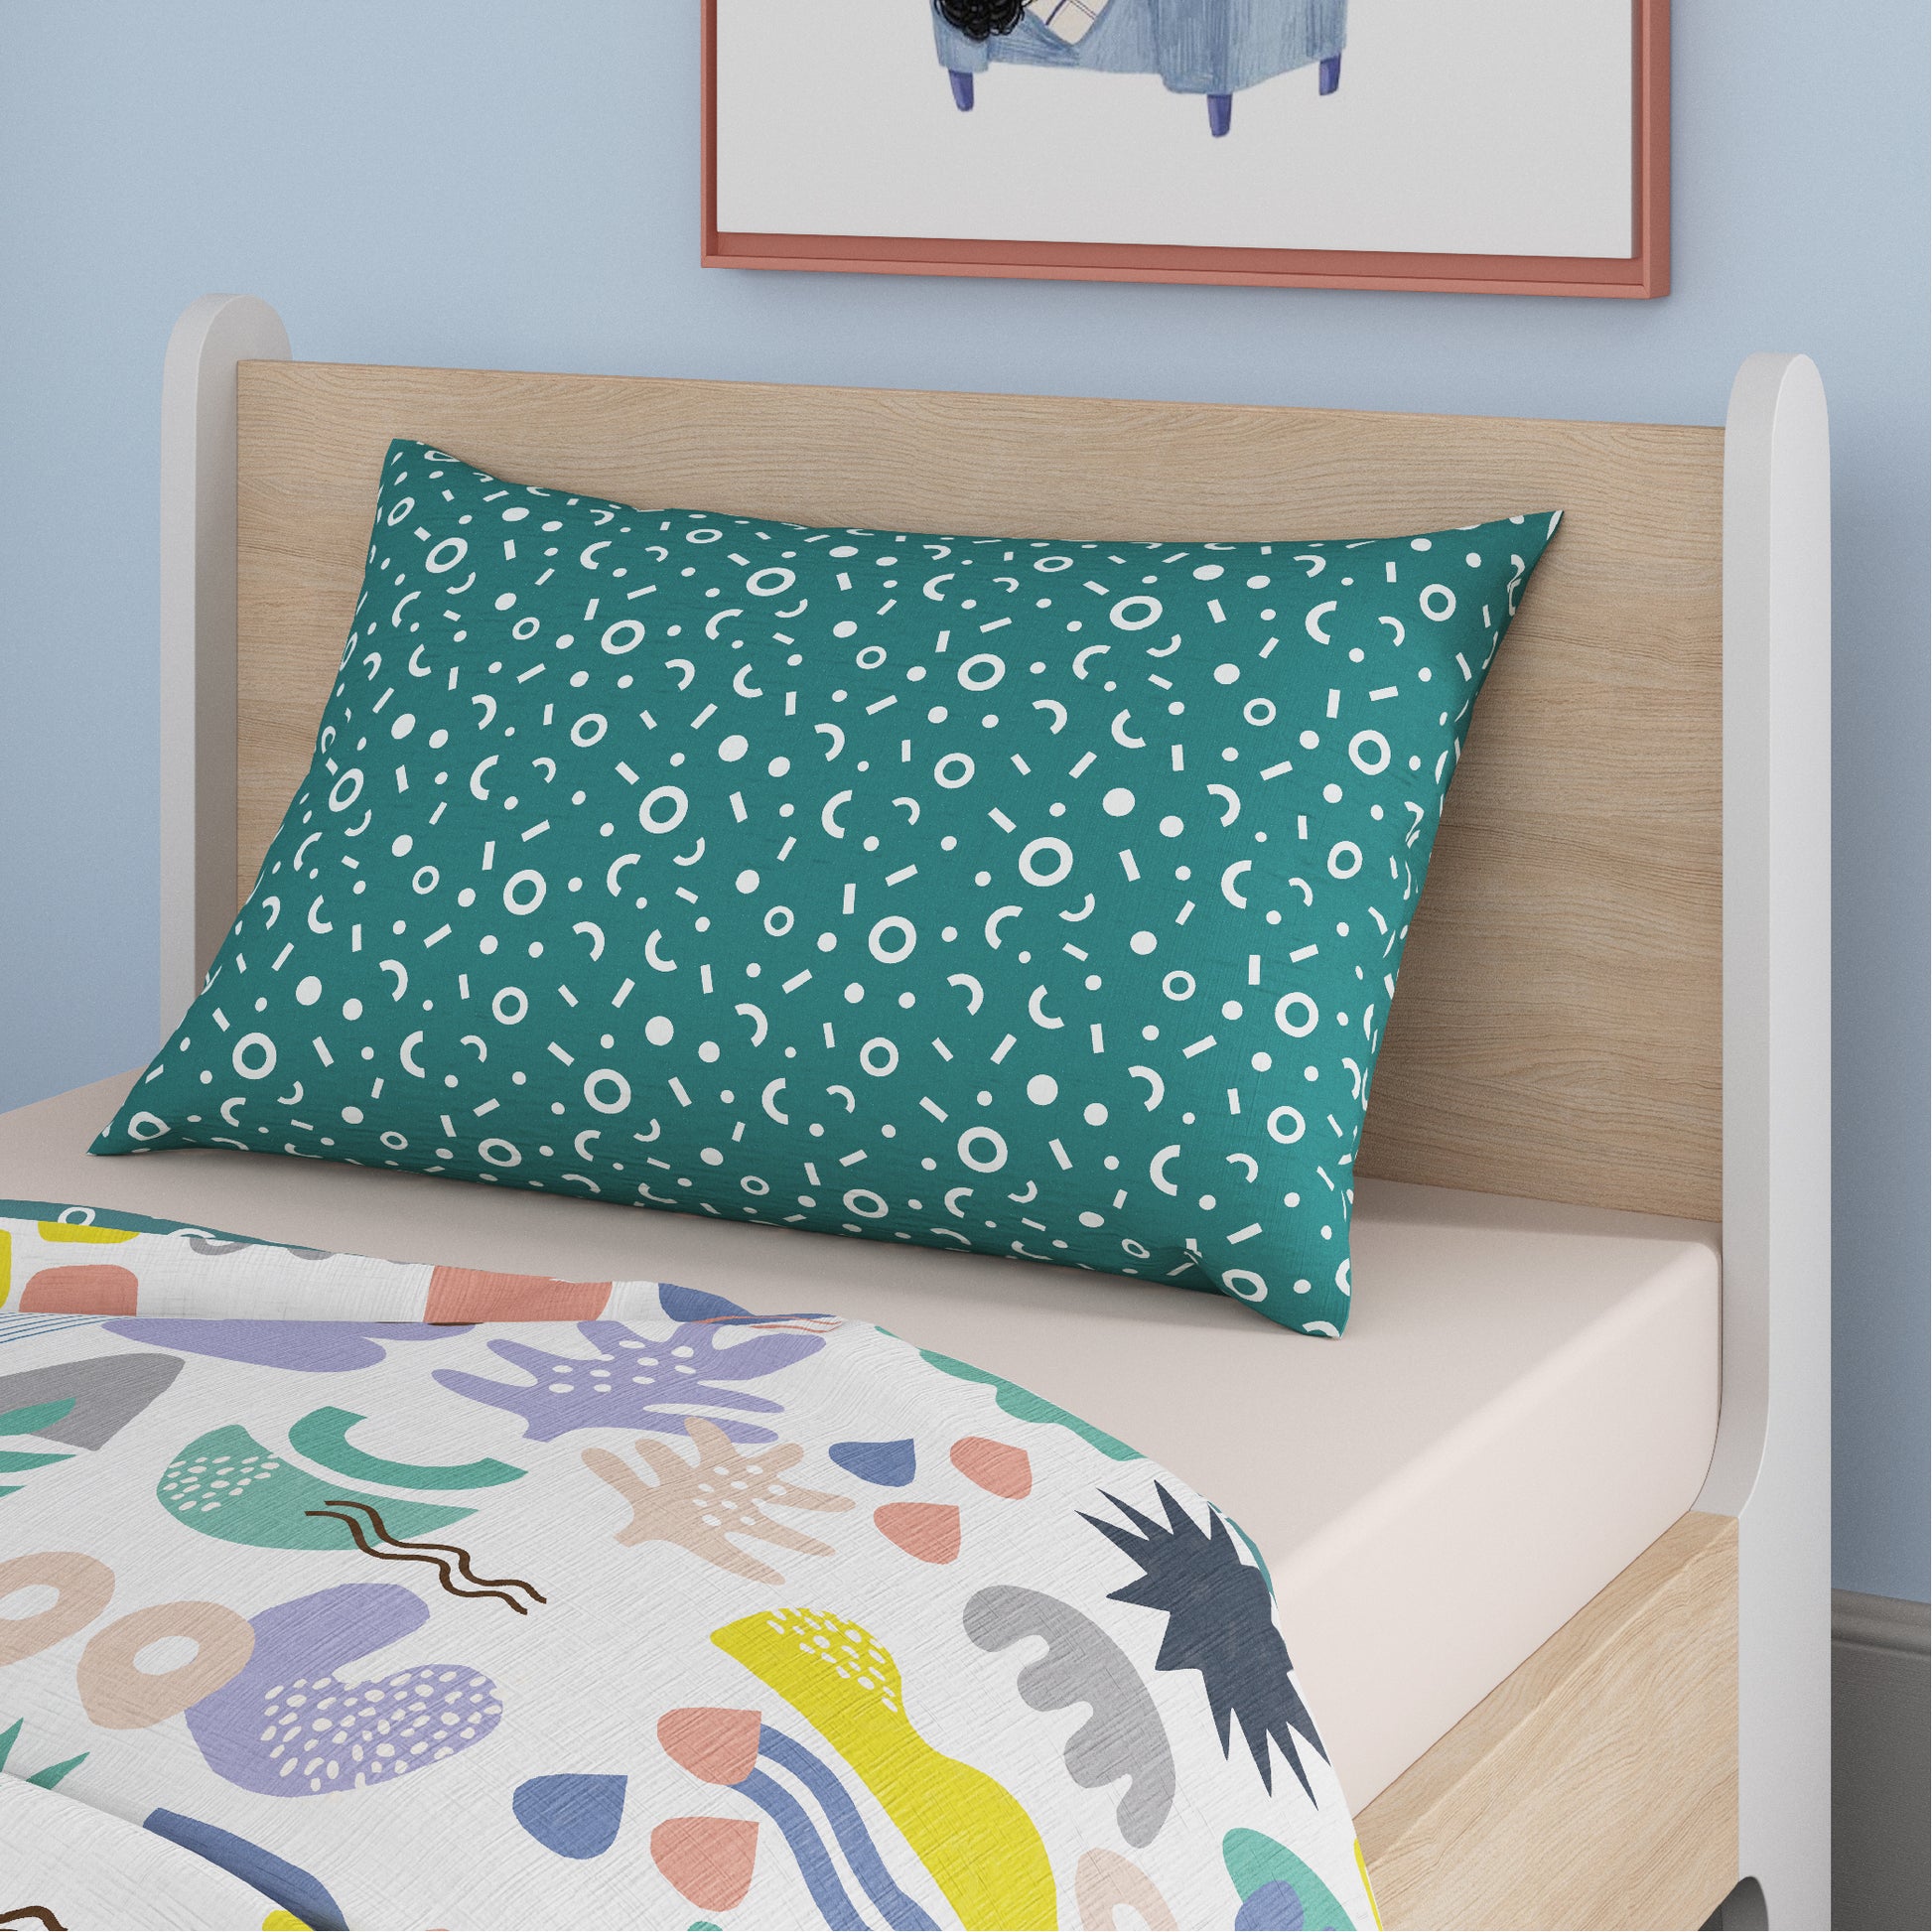 media_gallary Oodles of Doodles Reversible AC Comforter Single Bed Size 3